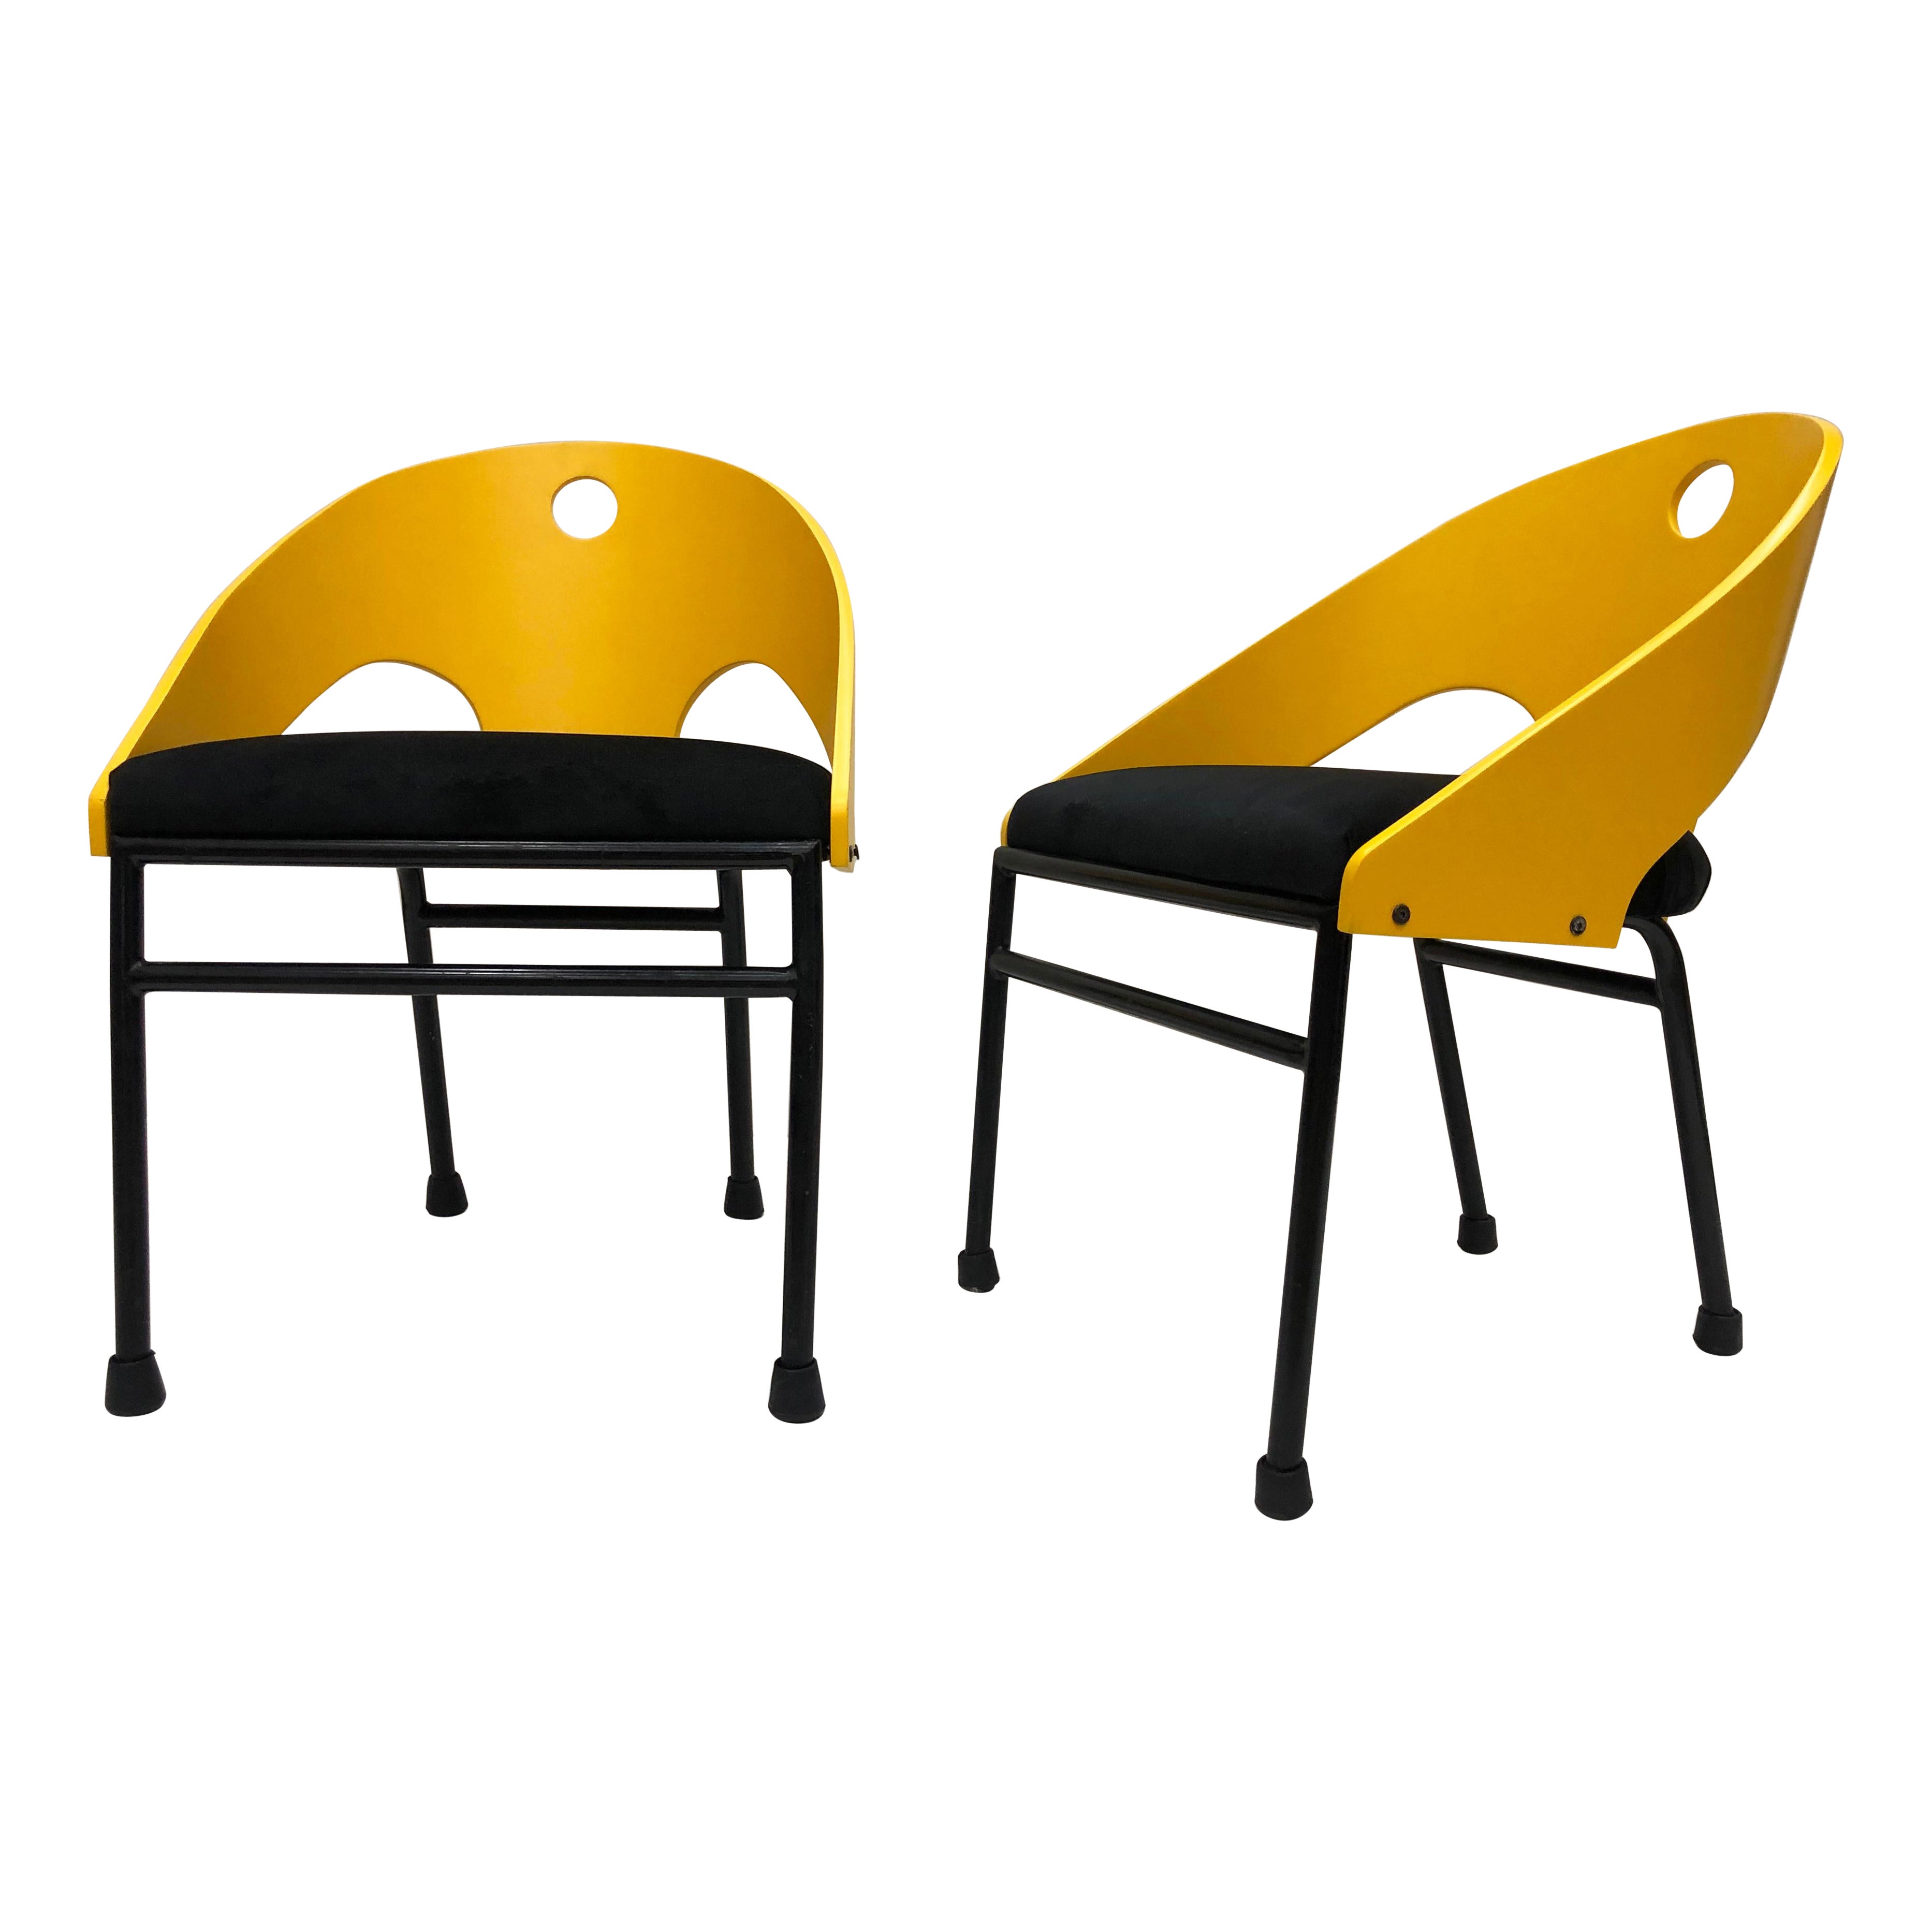 1980s Post-Modern Memphis Style Chairs, 3 Pairs Available